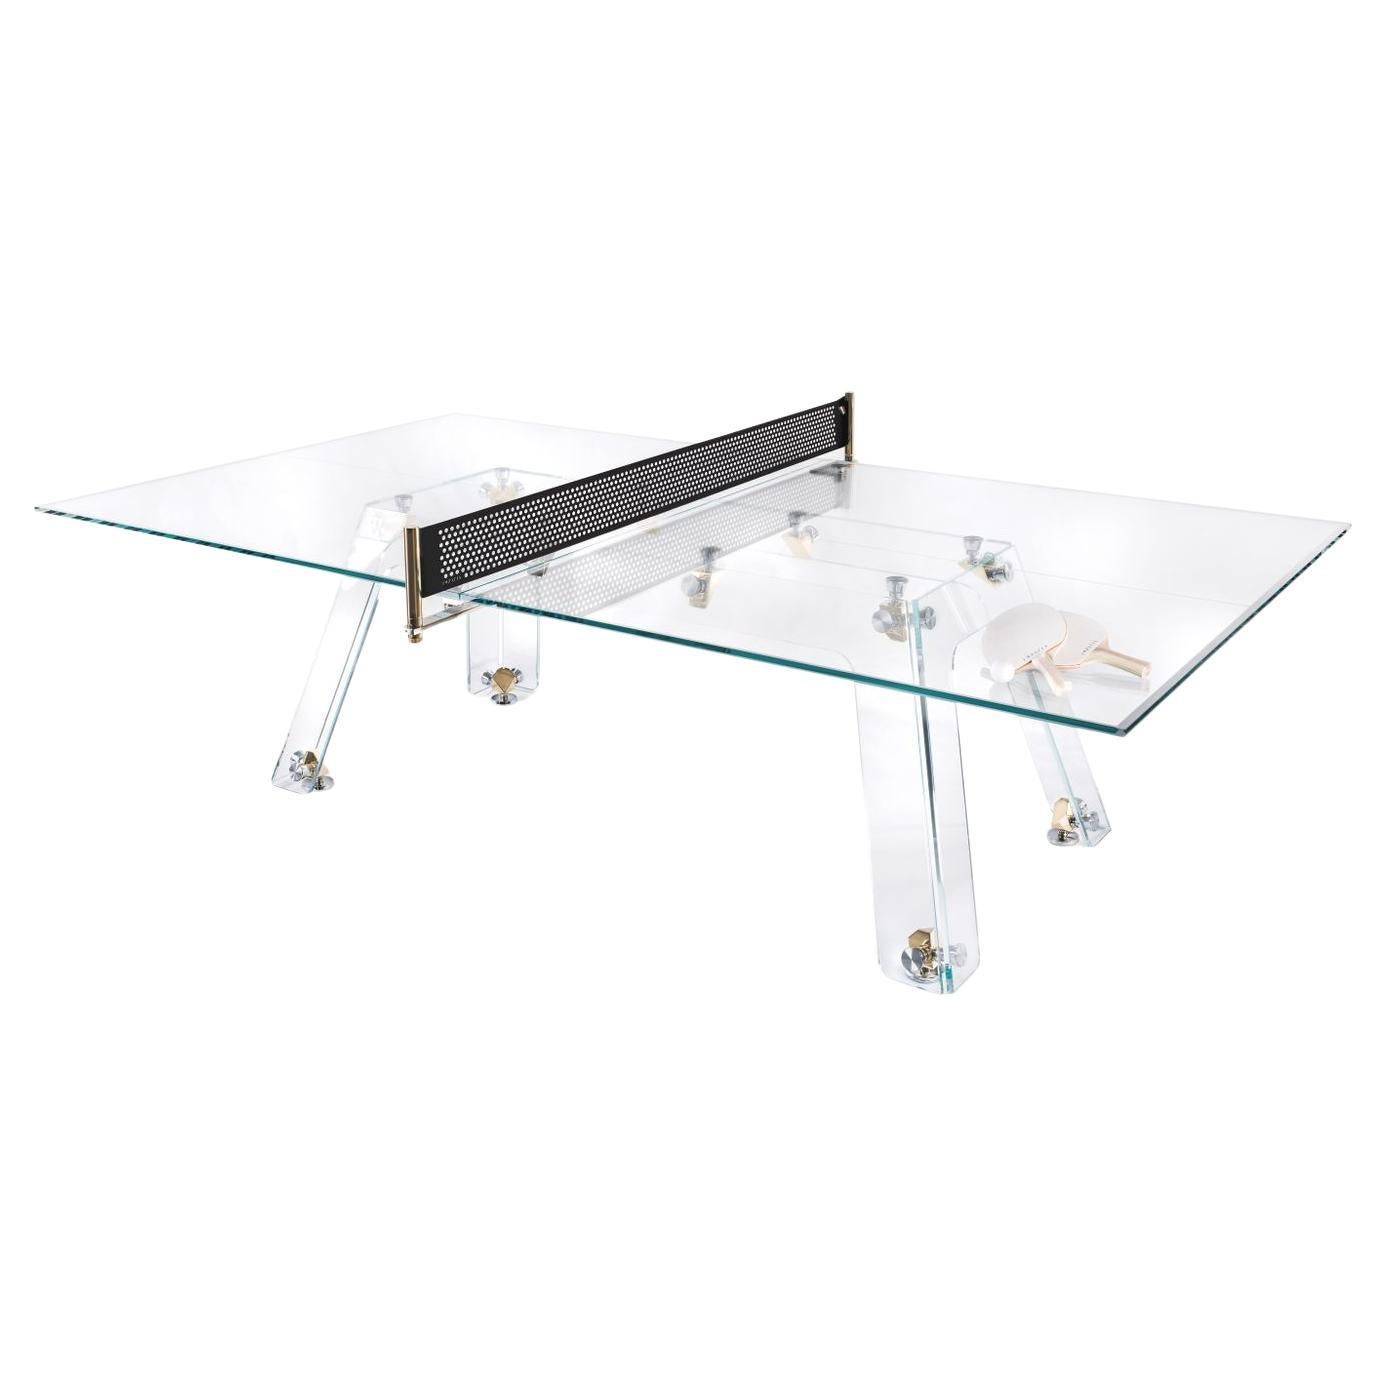 Lungolinea Gold Edition Table Tennis by Impatia